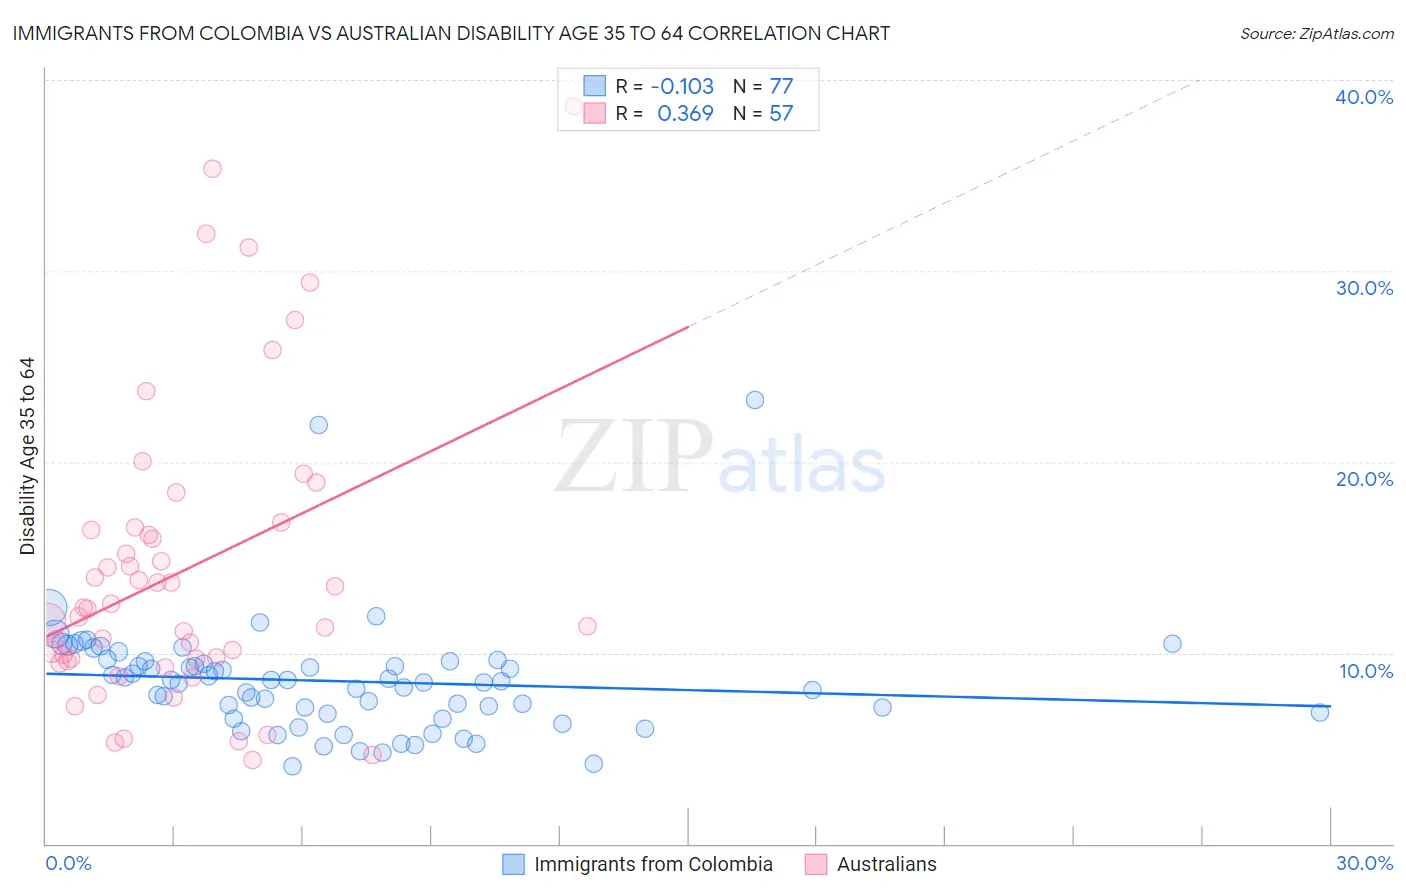 Immigrants from Colombia vs Australian Disability Age 35 to 64